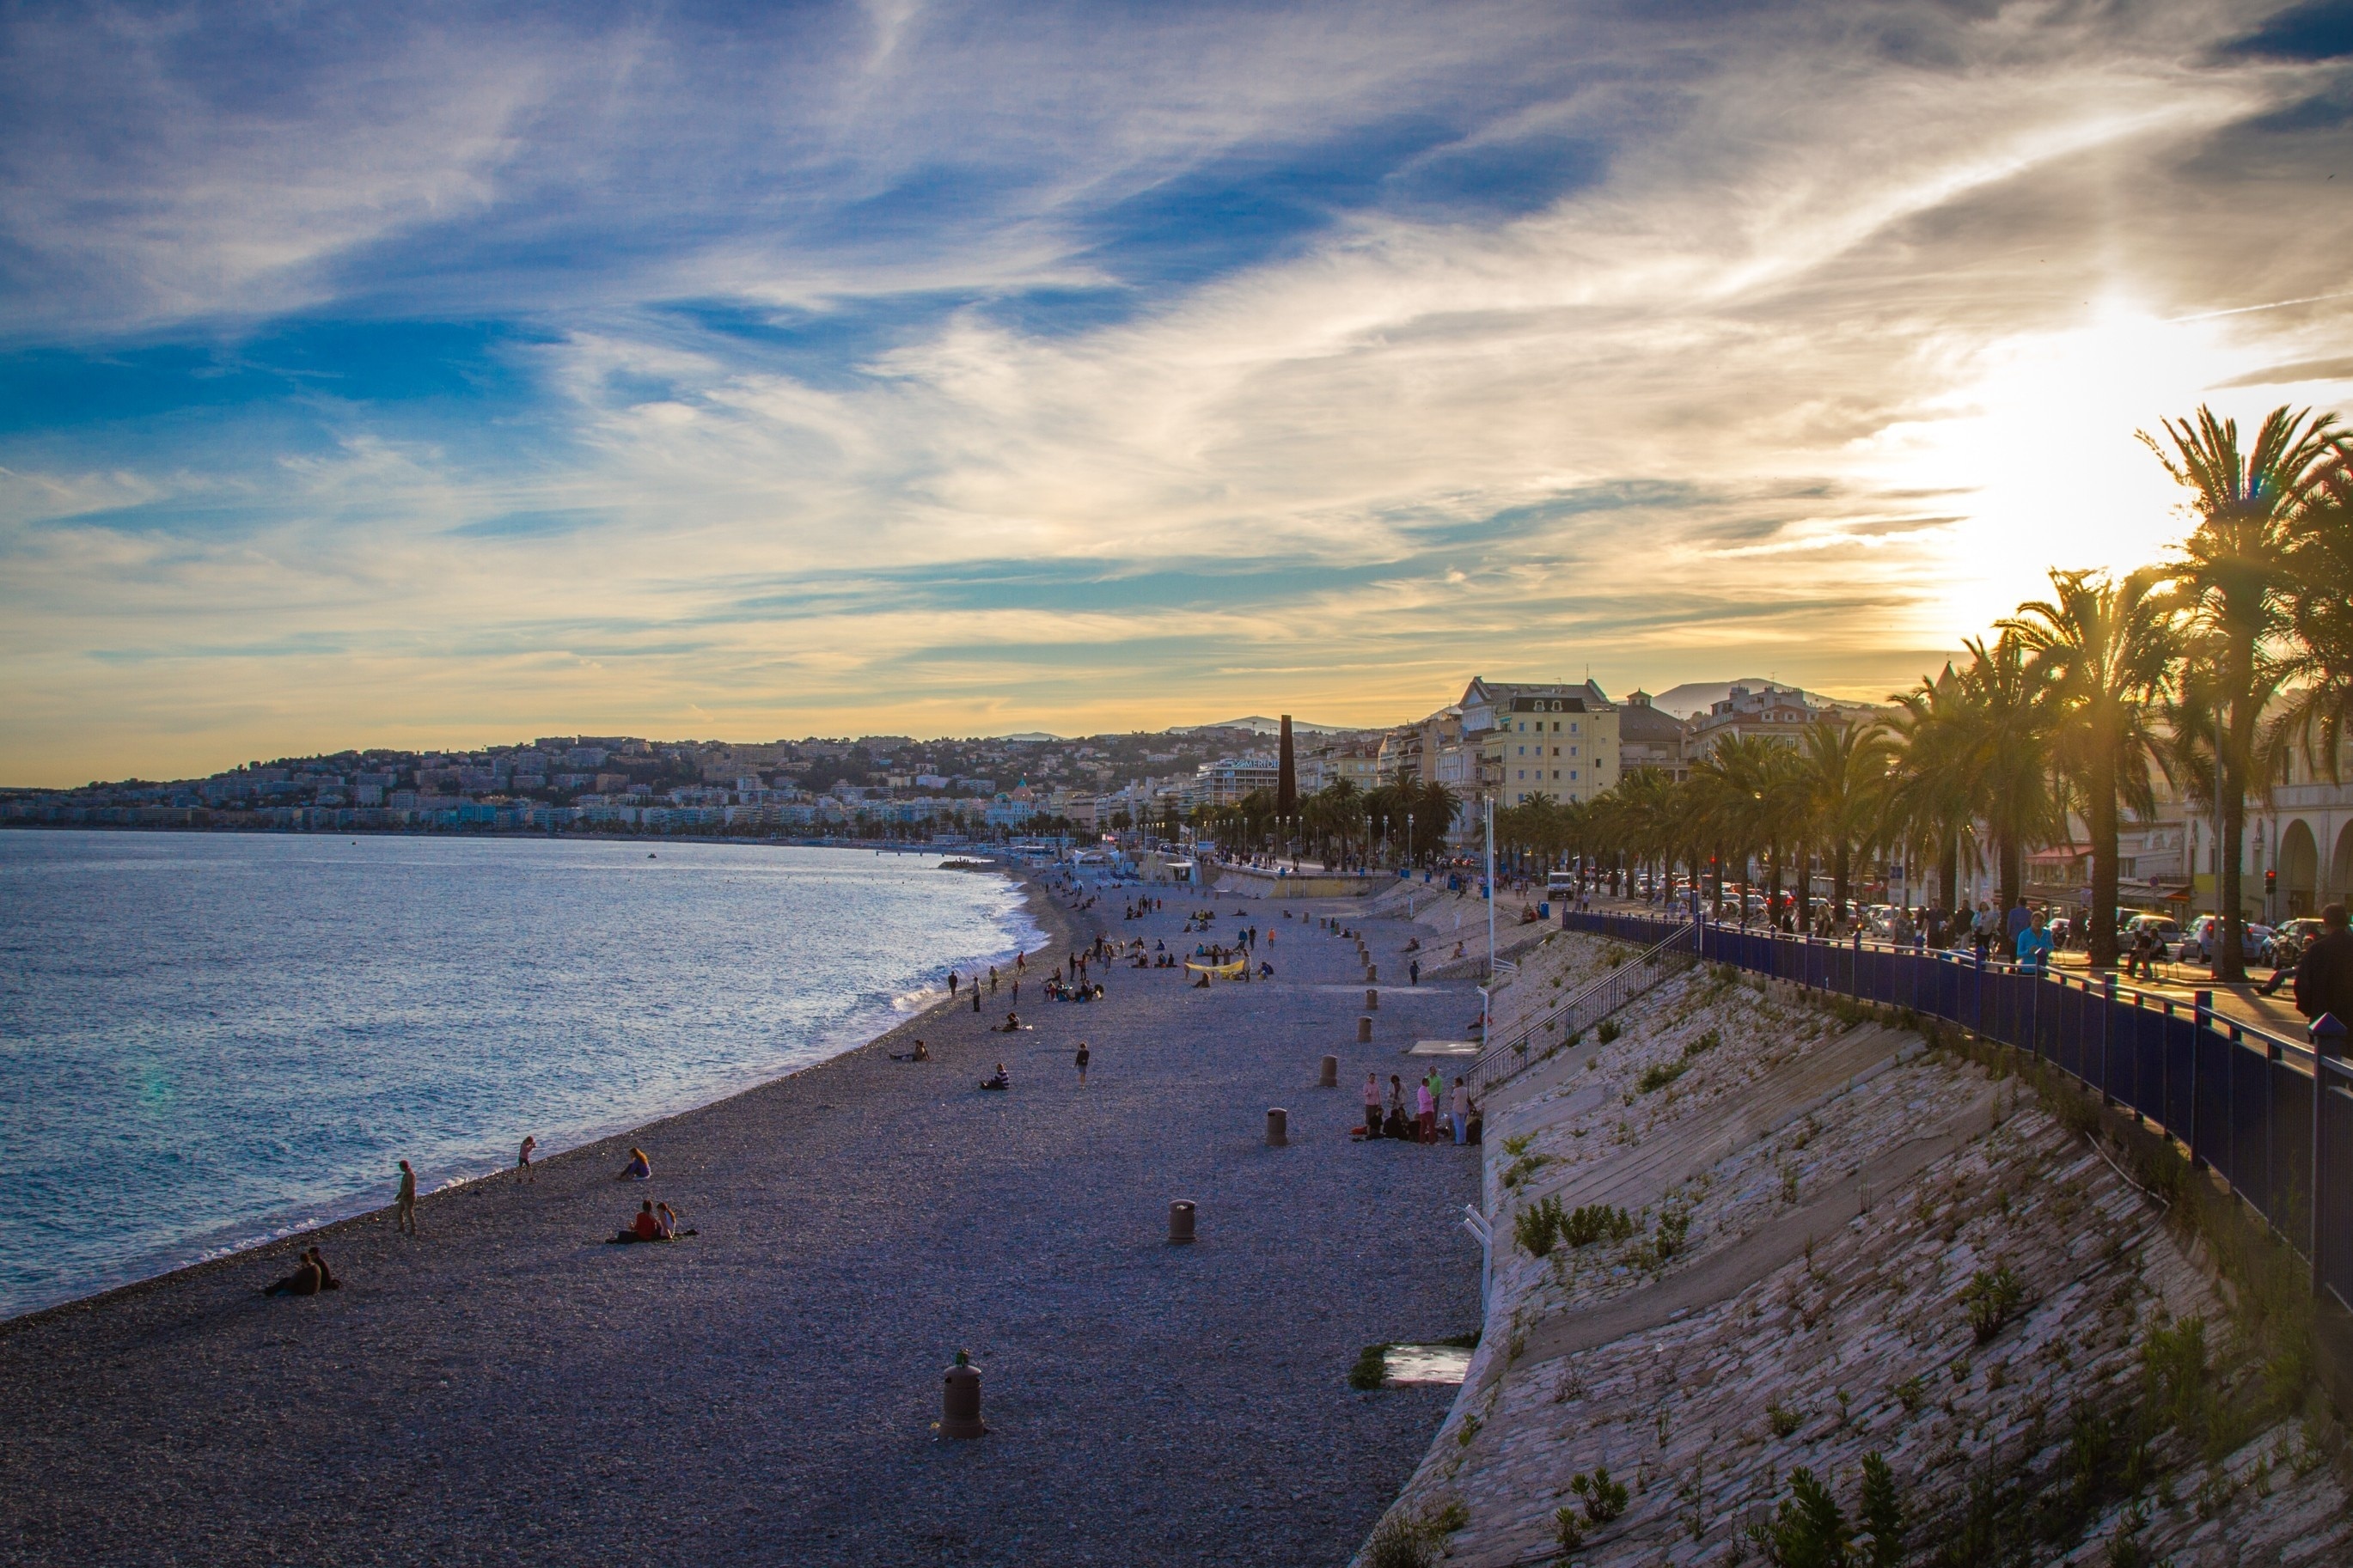 Beautiful sunset on the promenade in Nice, France. Perfect for an afternoon stroll and people watching. Such a popular beach despite it not being sand based. #LifeAtExpedia #Beaches